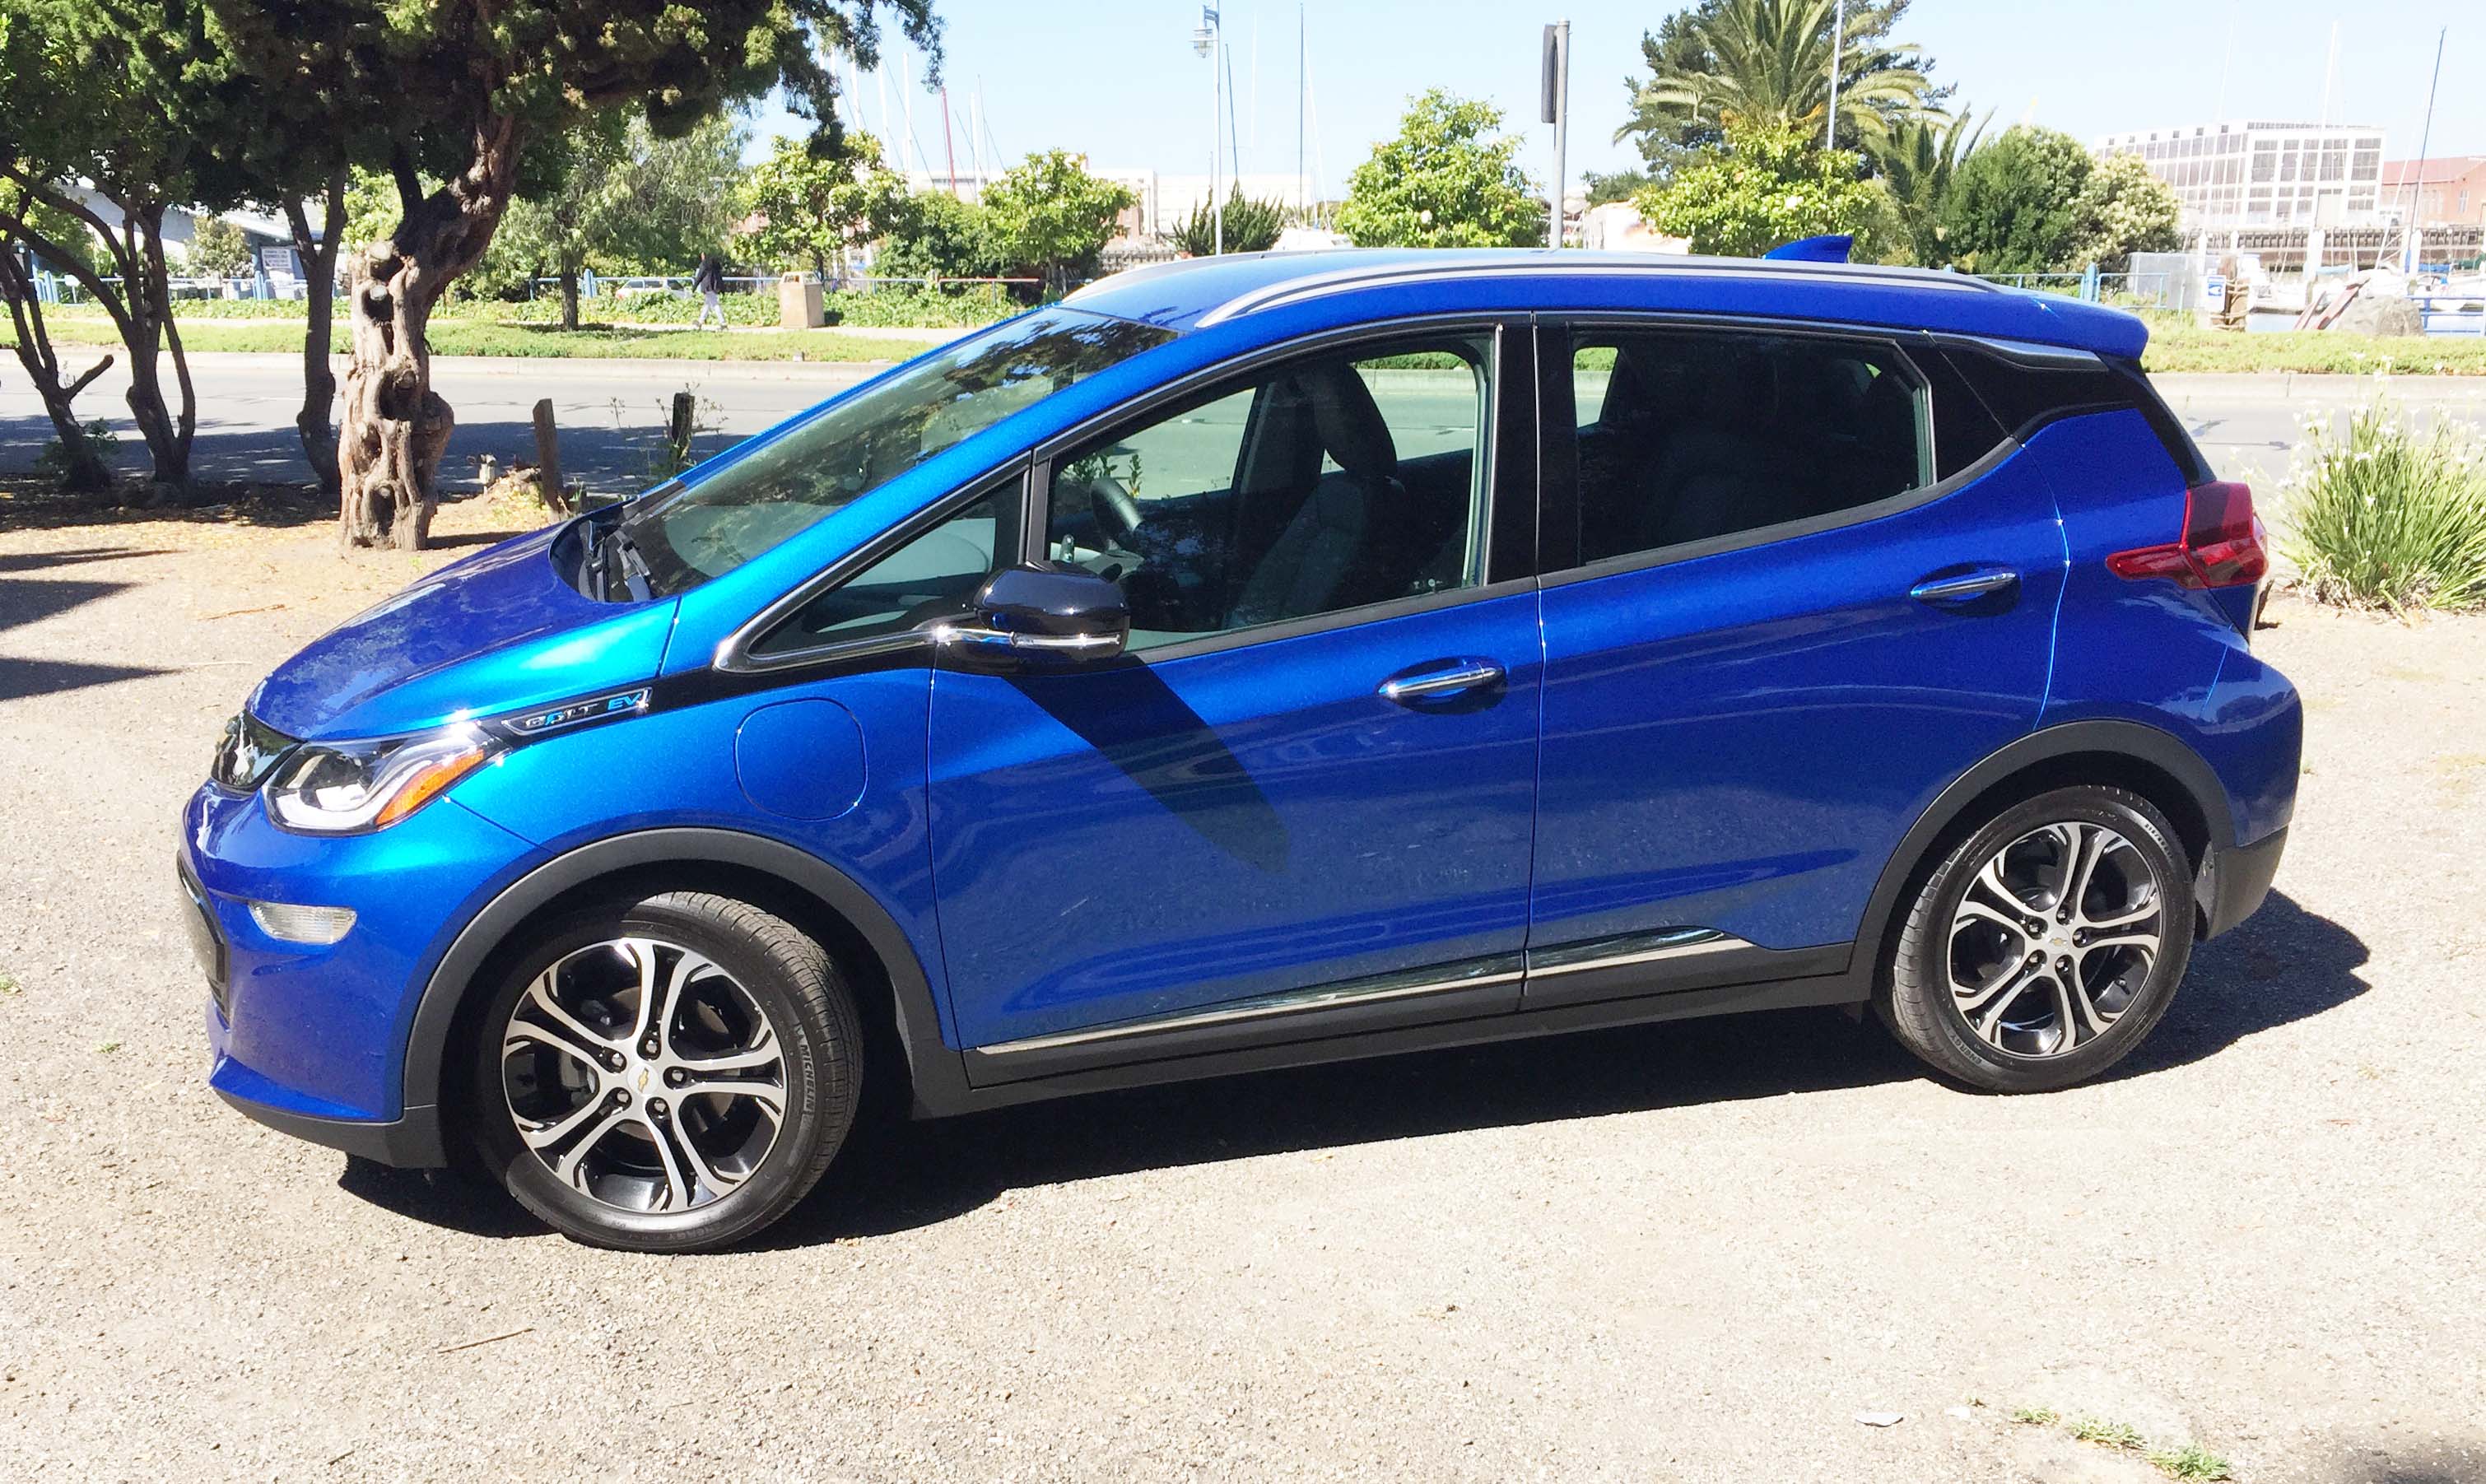 2017 Chevrolet Bolt EV: A Leap in Electric Vehicle Value [Review]